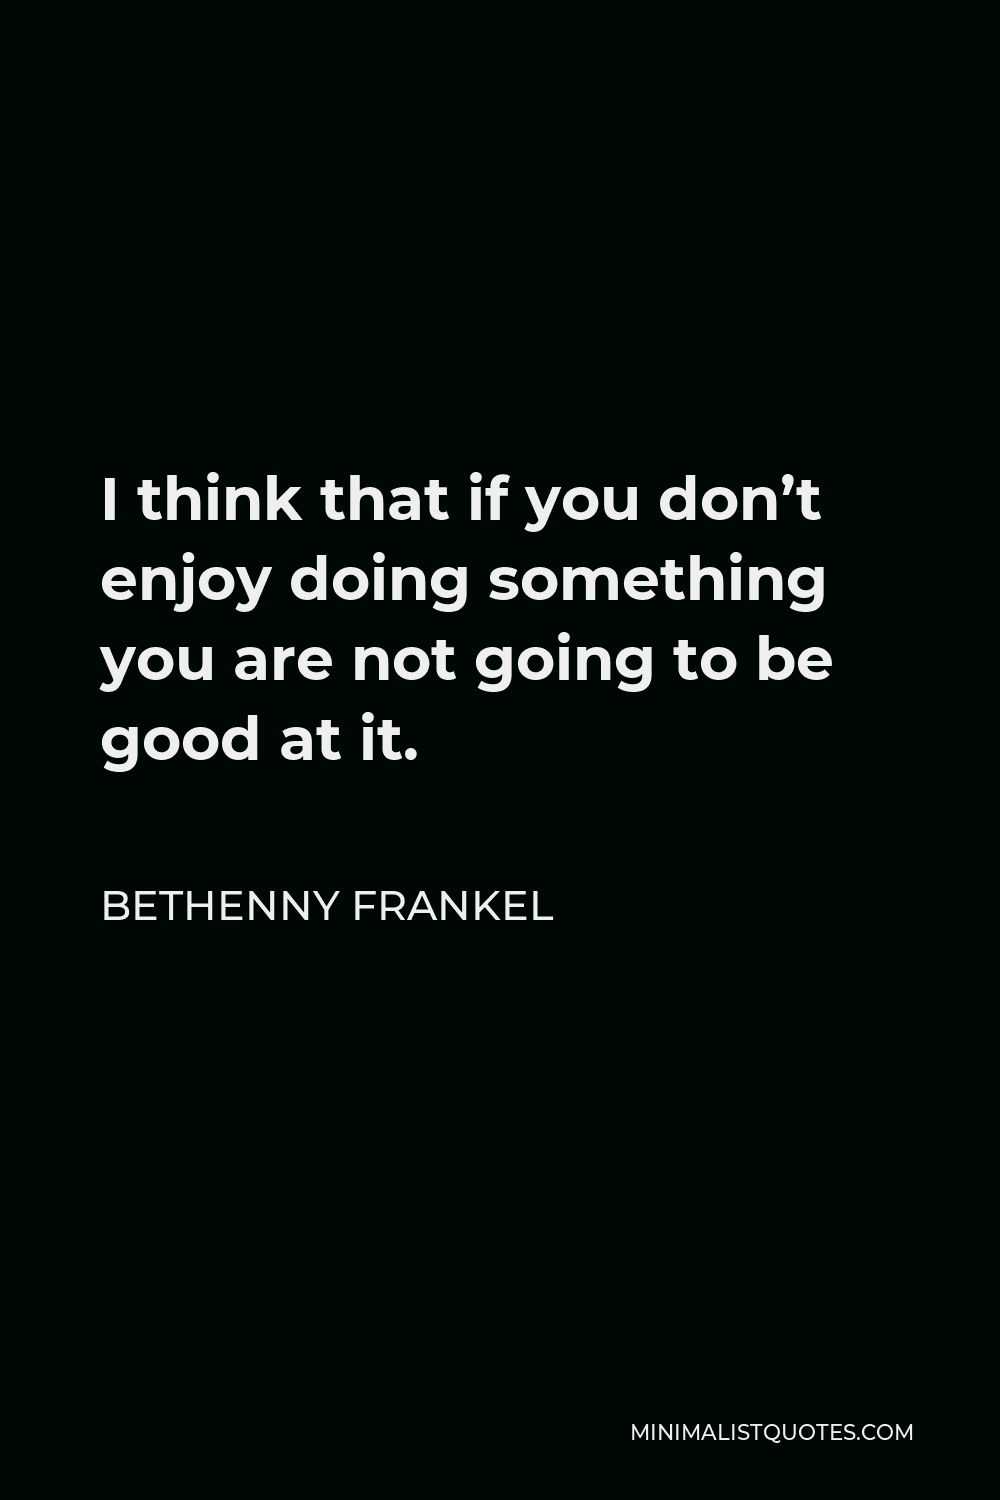 Bethenny Frankel Quote - I think that if you don’t enjoy doing something you are not going to be good at it.